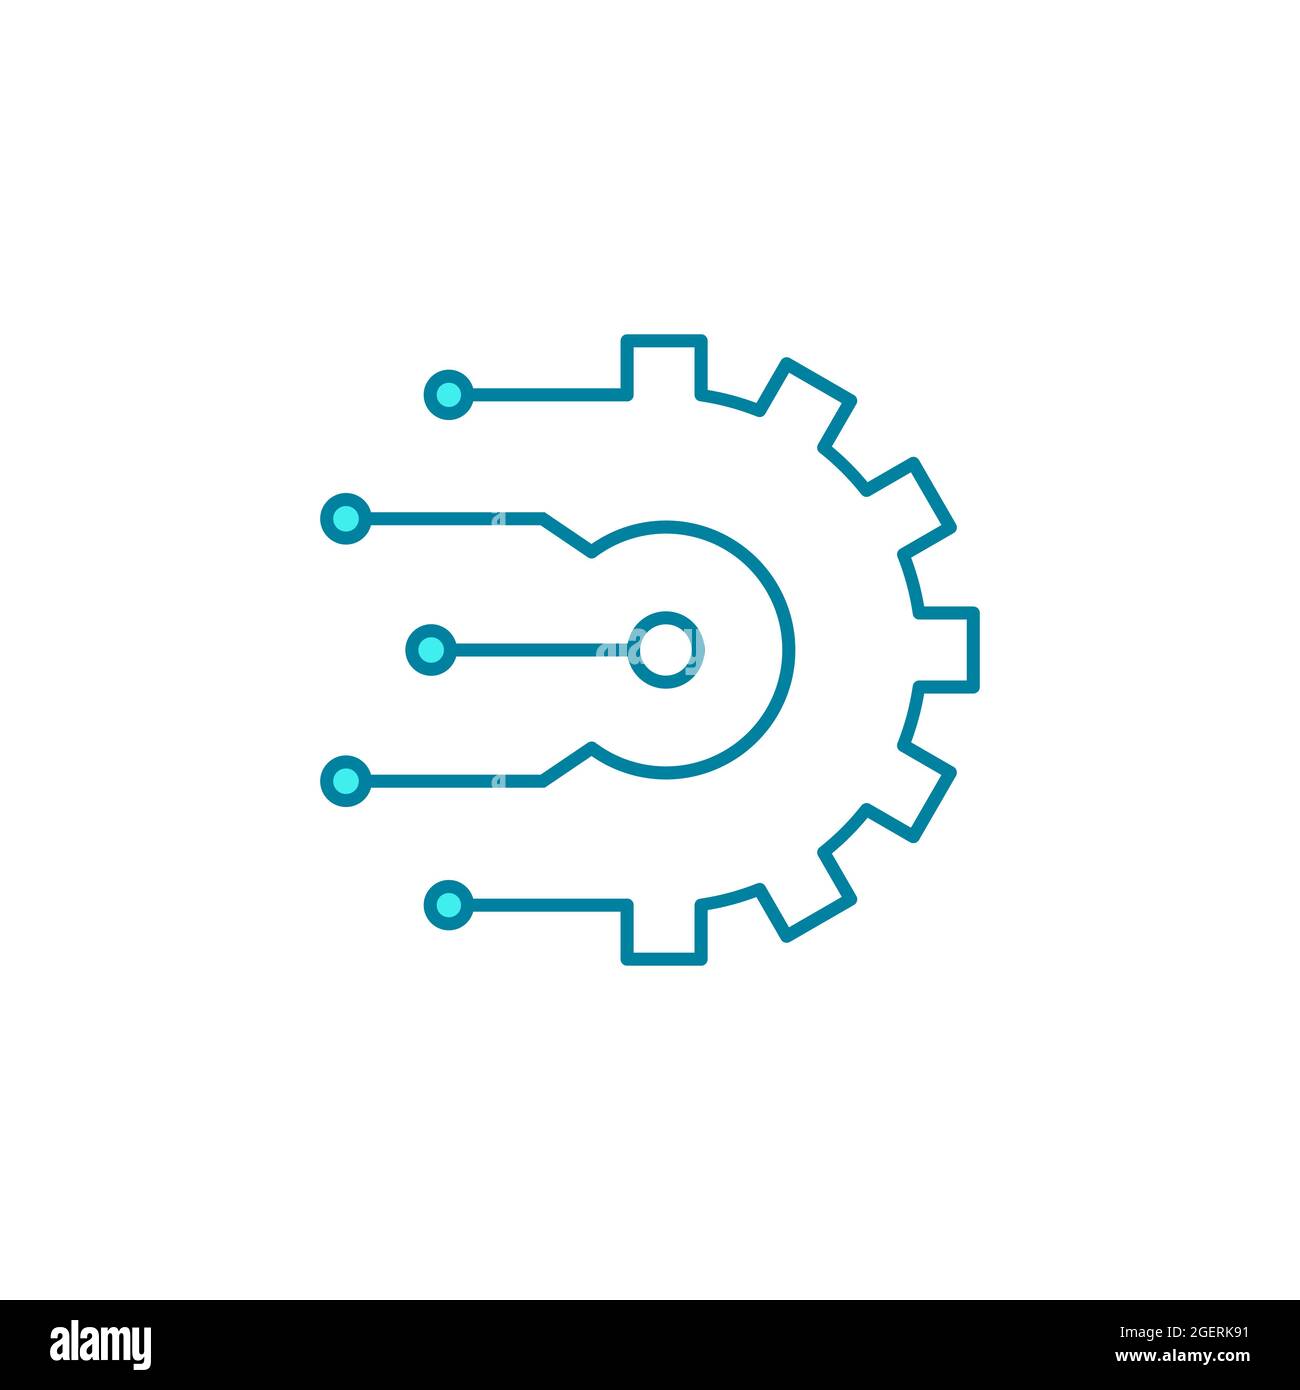 Artificial intelligence gear line icon. Machine learning process. Automation and industry 4.0 revolution. Digital transformation. Vector illustration. Stock Vector